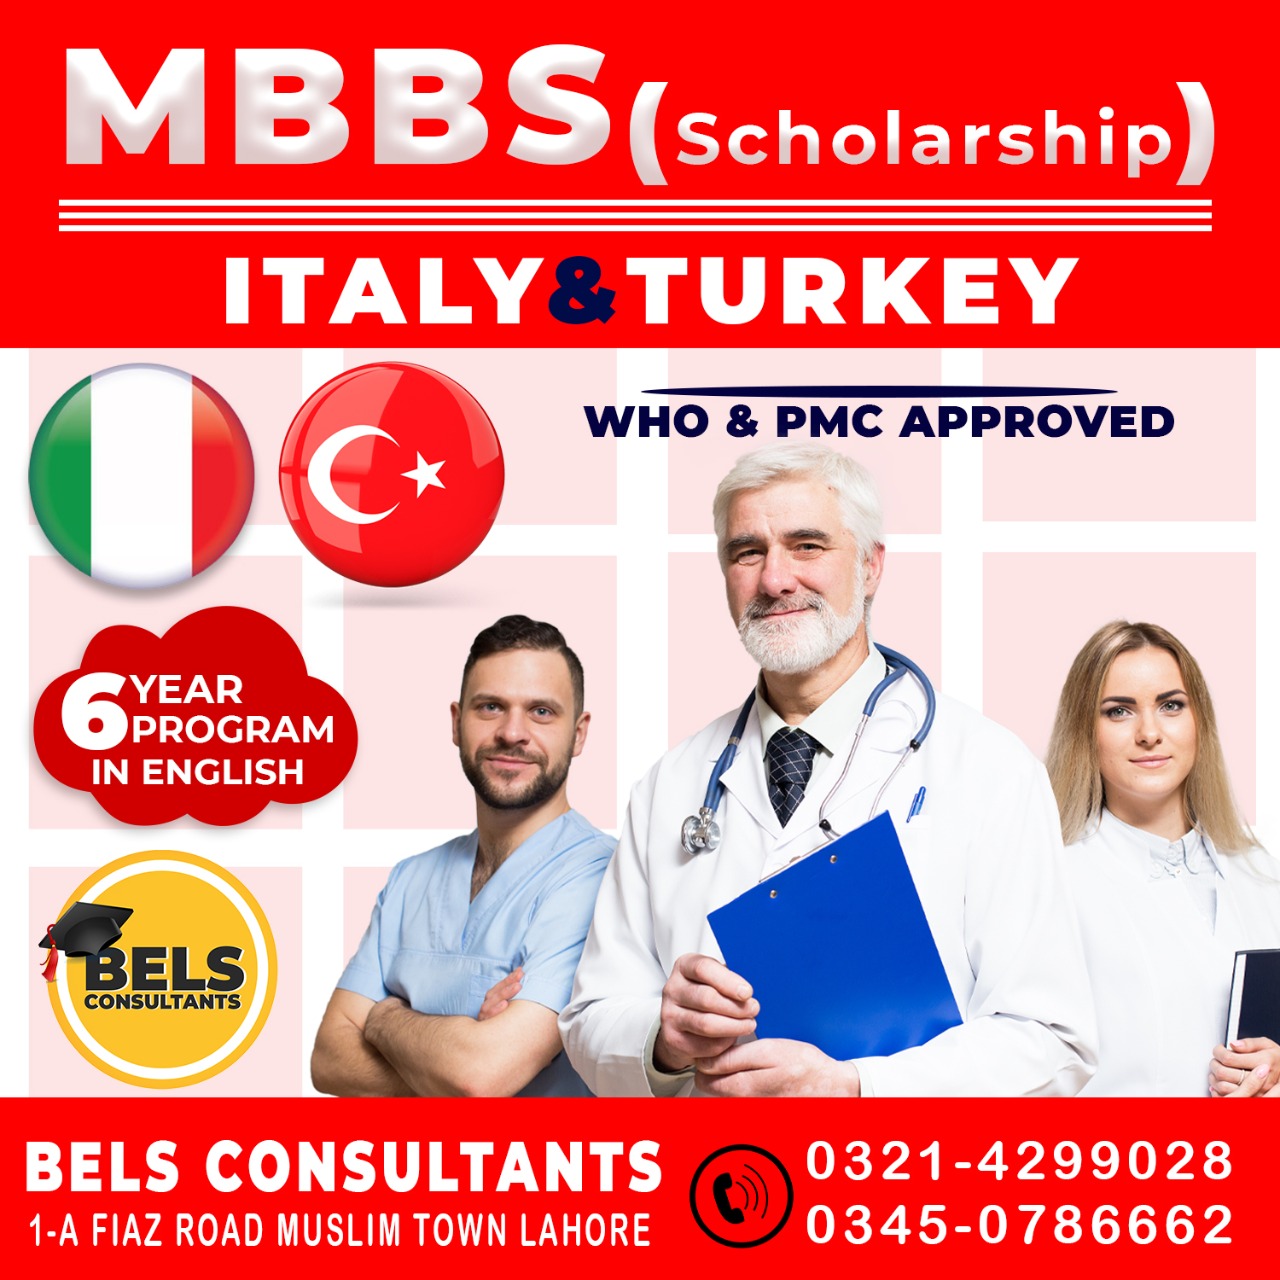 Scholarship-MBBS-in-Turkey-Italy-for-Pakistani-Students-Admission-2021-2022